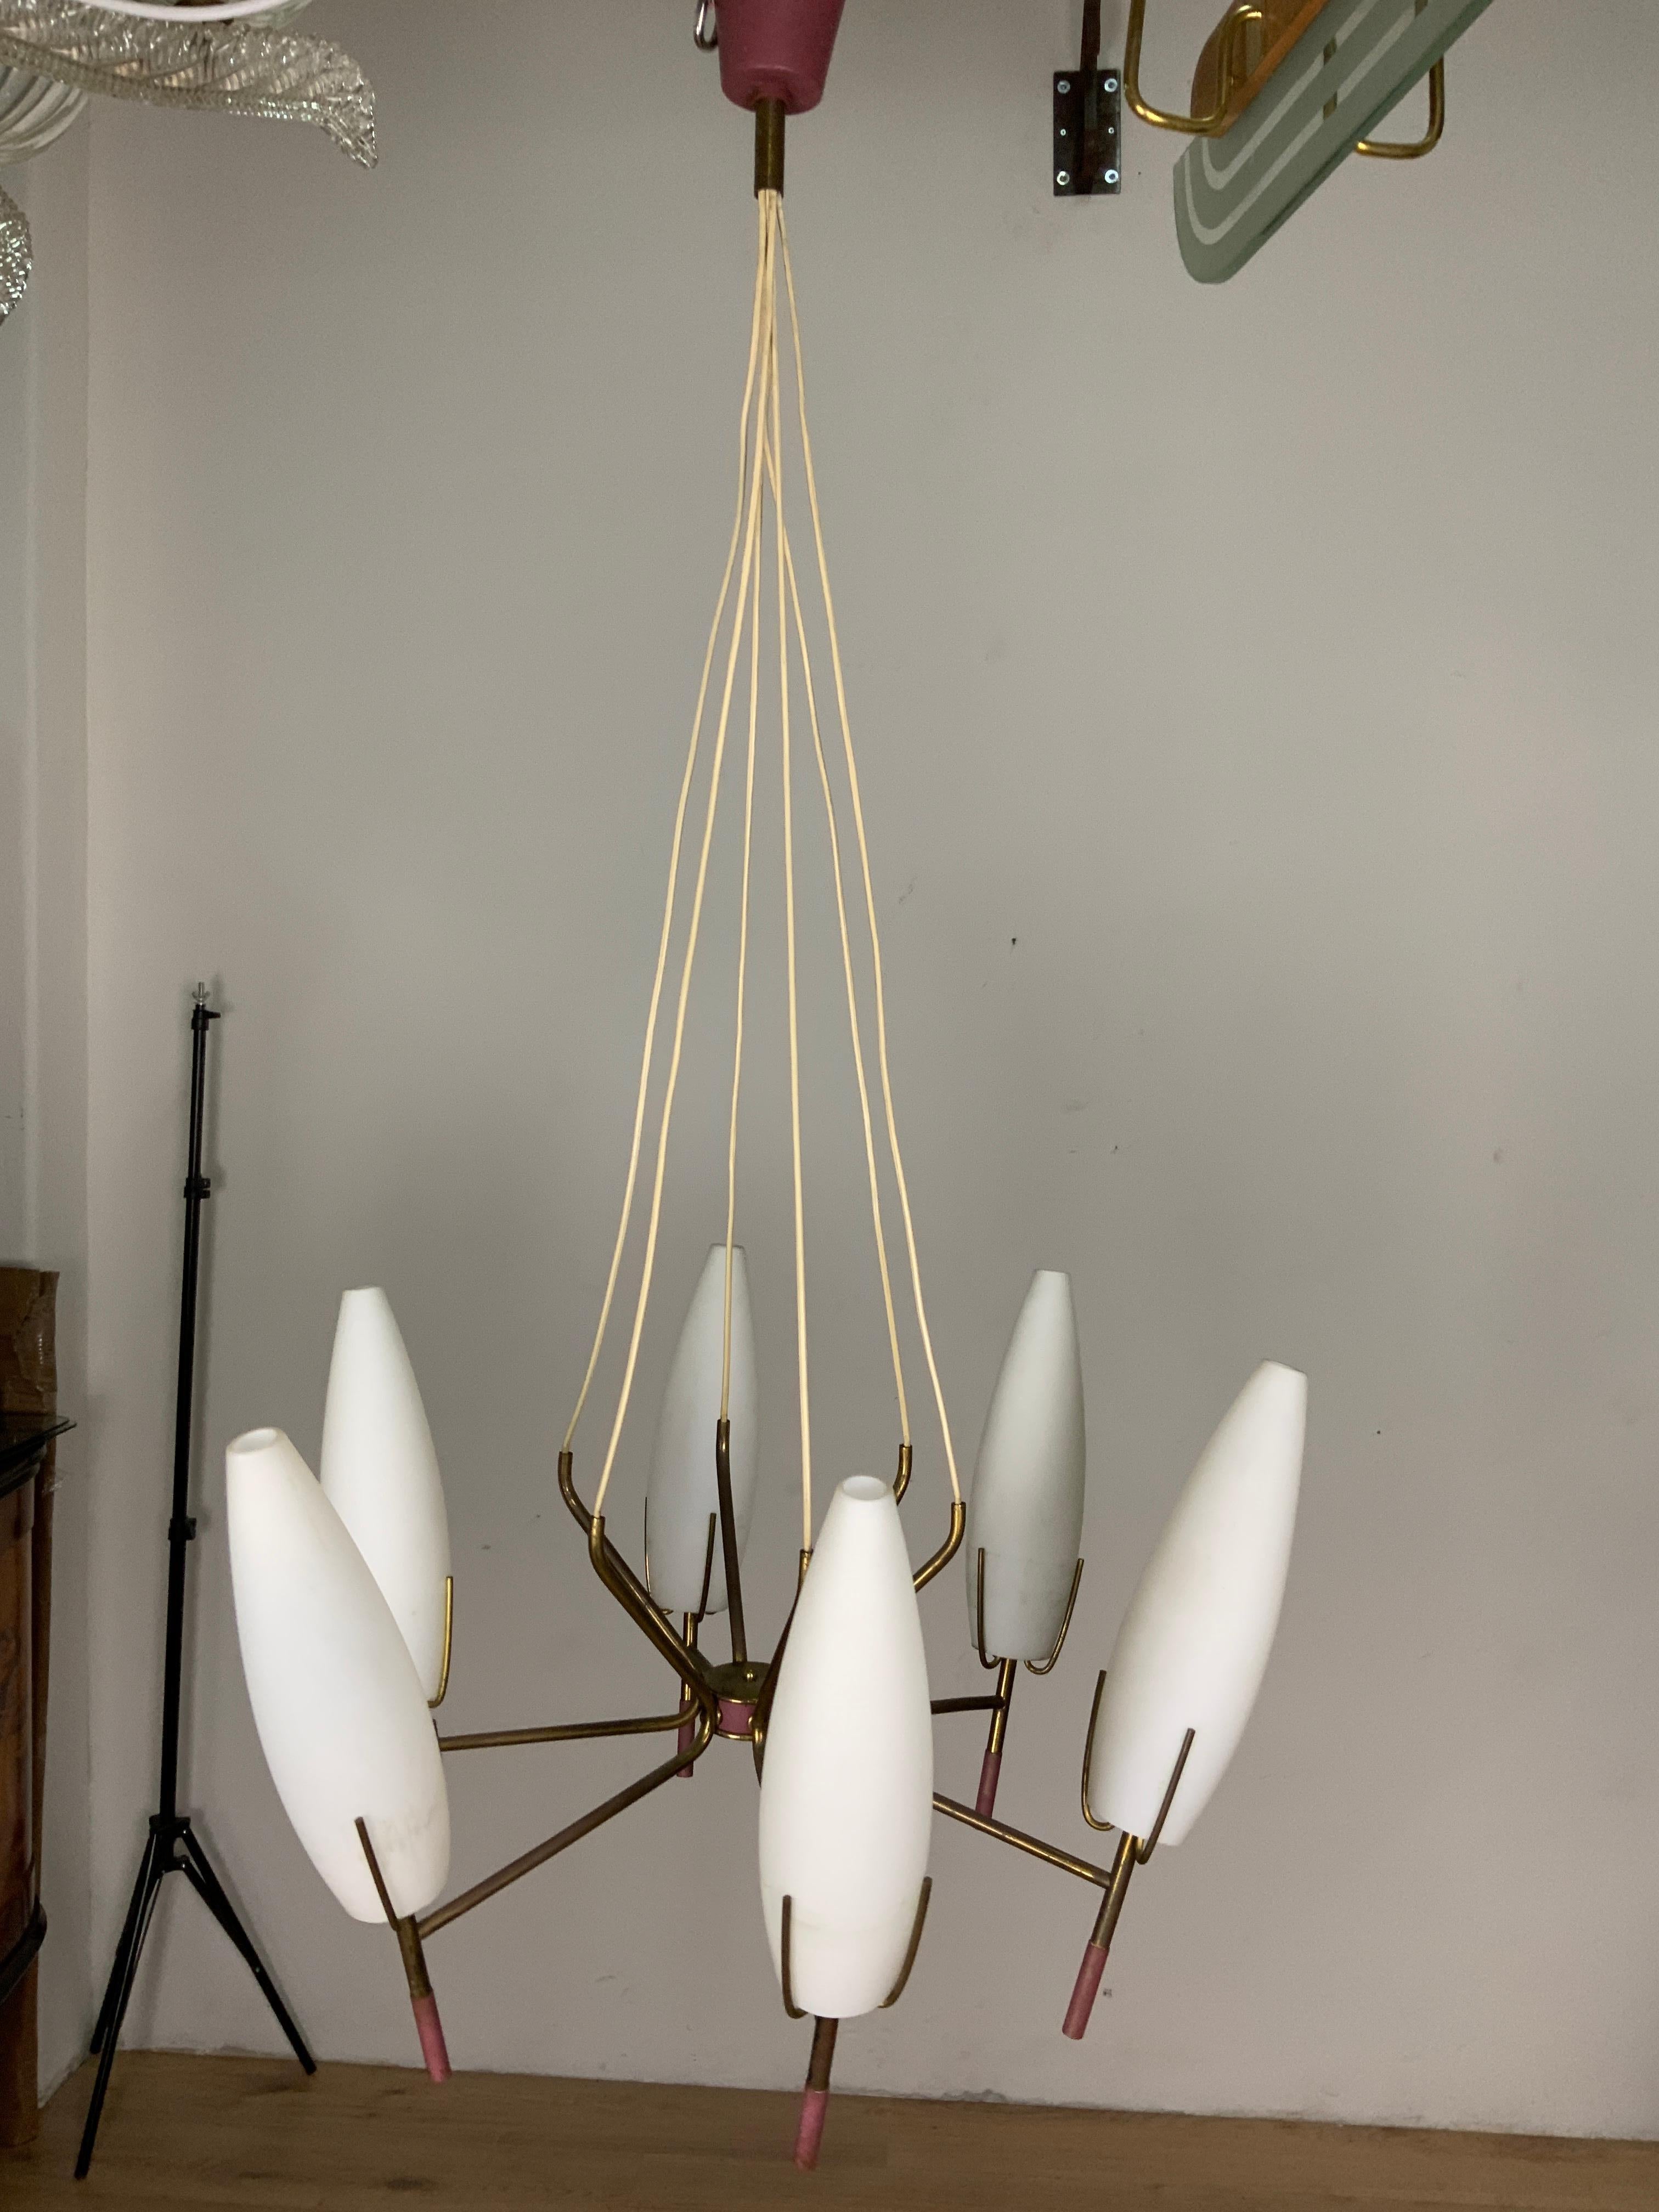 Chandelier from the 1950s, 6 lights, attributed to the manufacturer Stilnovo.